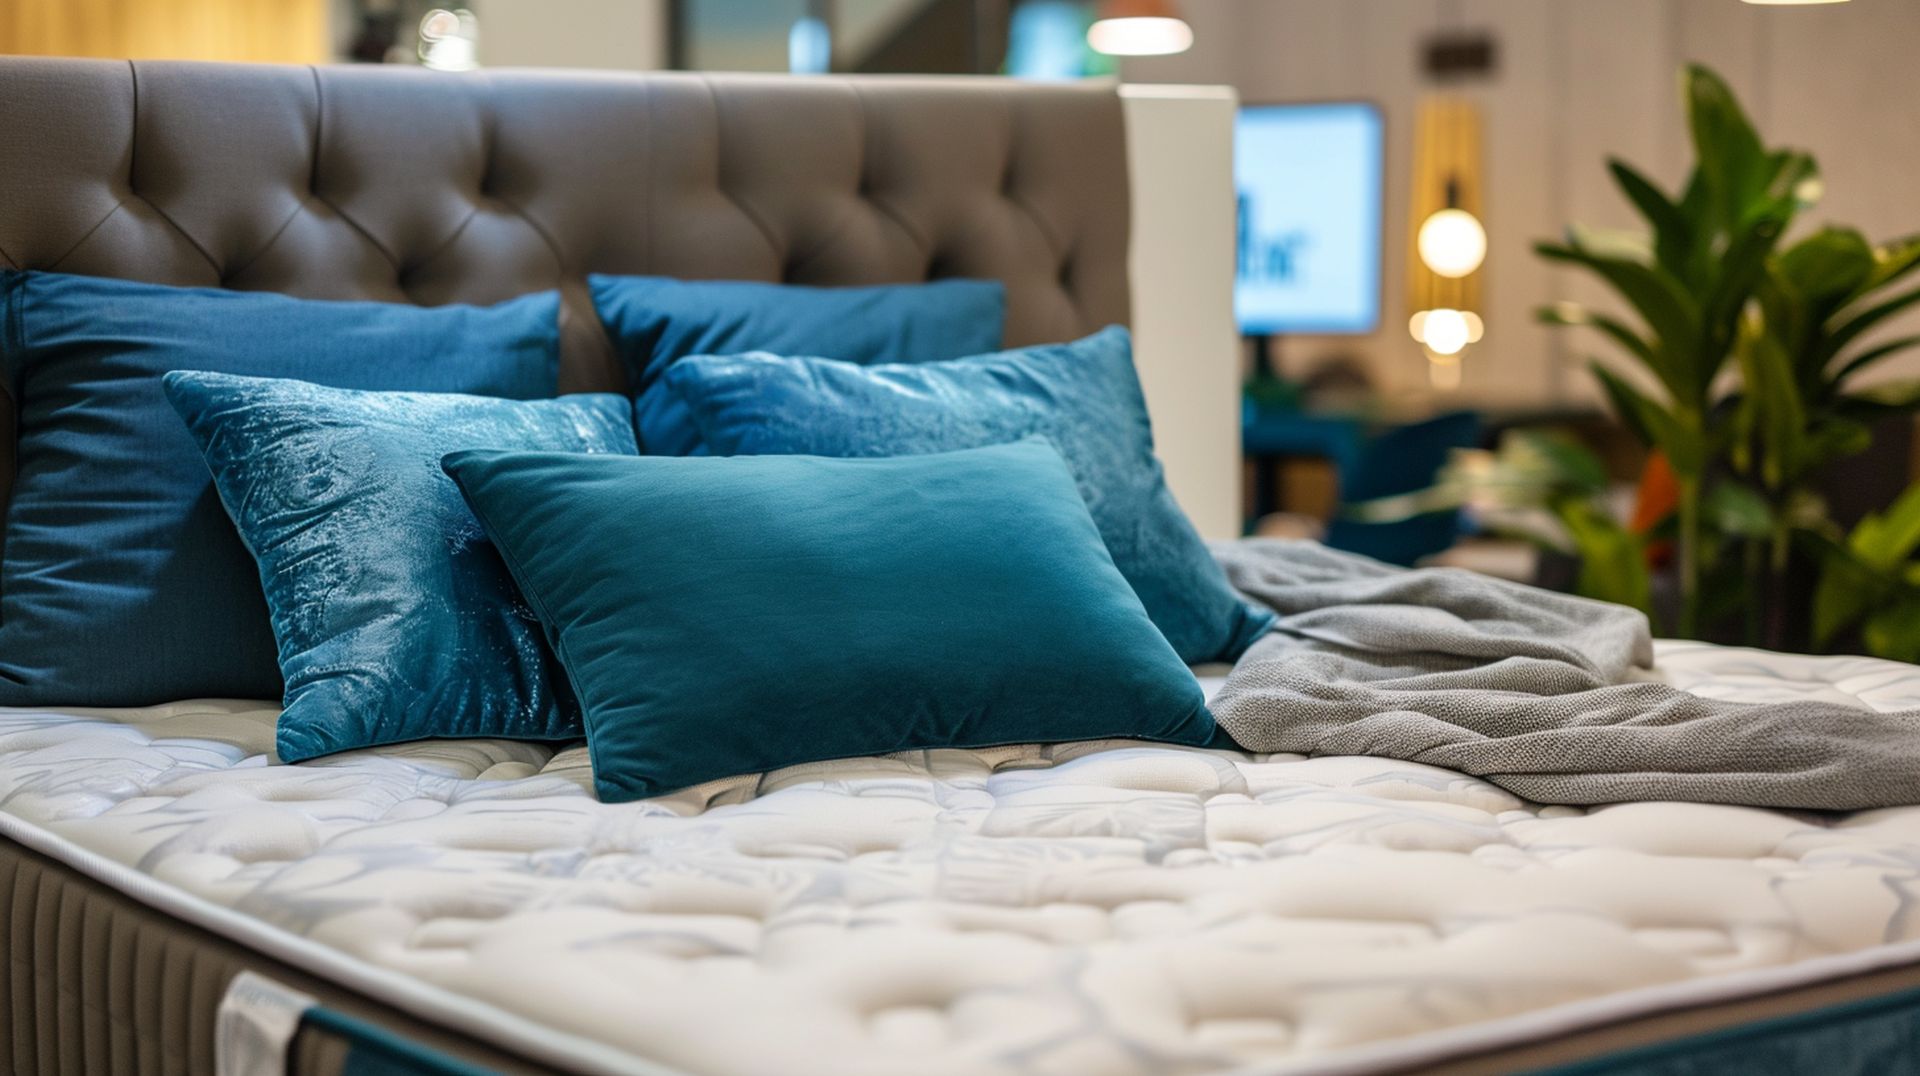 If you're looking for a new bed, mattress stores in San Bernardino offer the best customer and delivery service, financing, and warranties in California